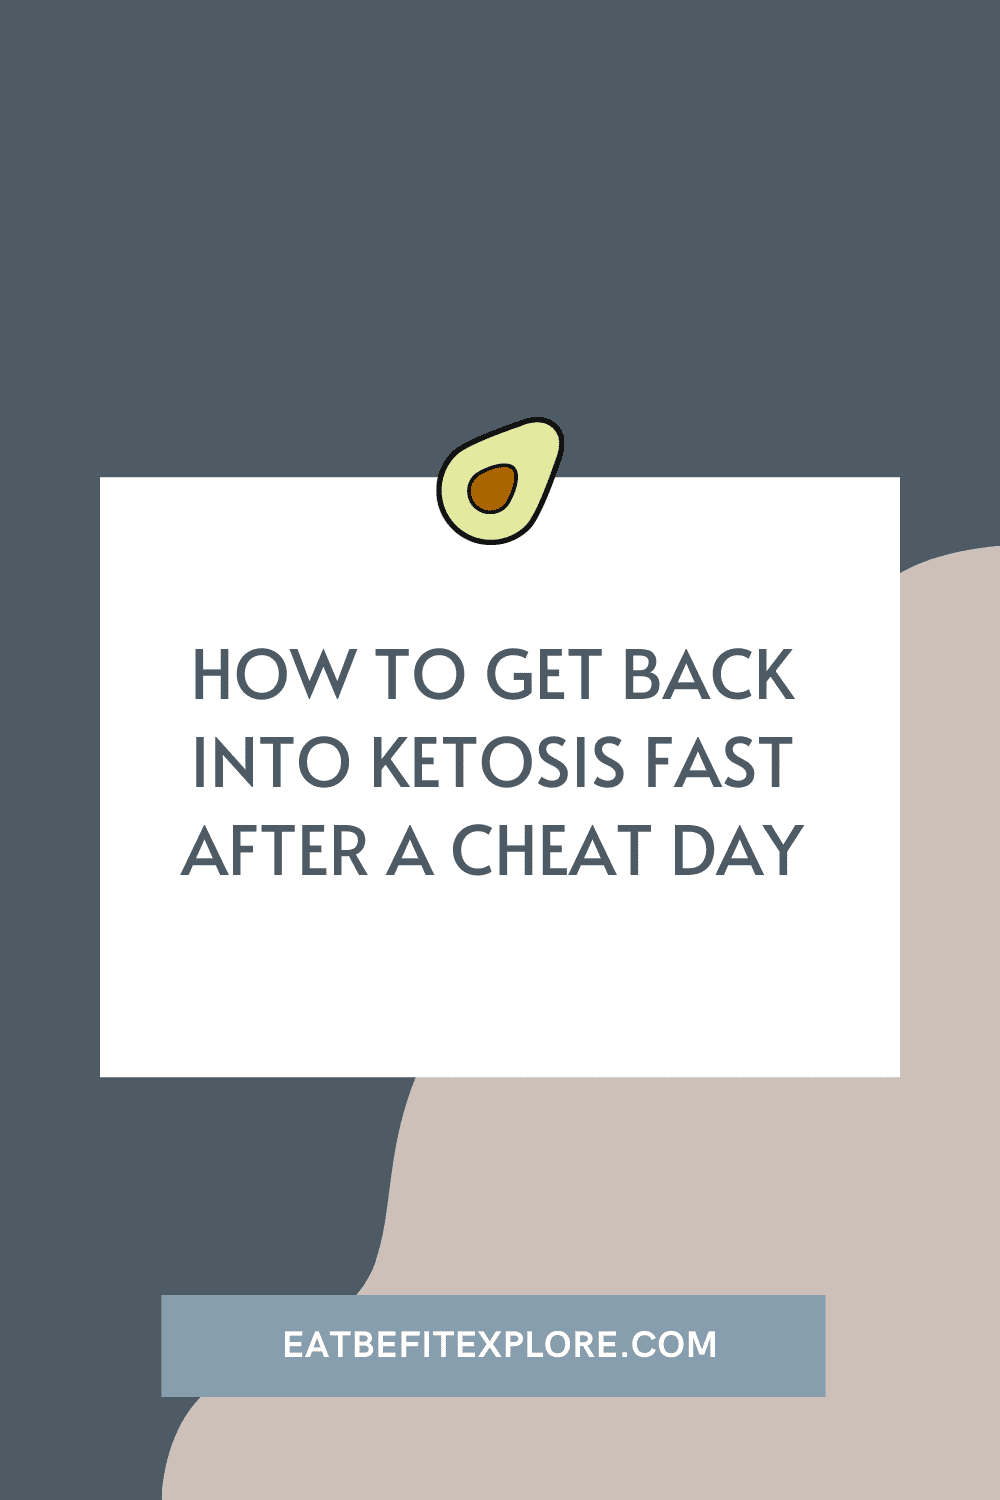 How To Get Back into Ketosis after a Cheat day